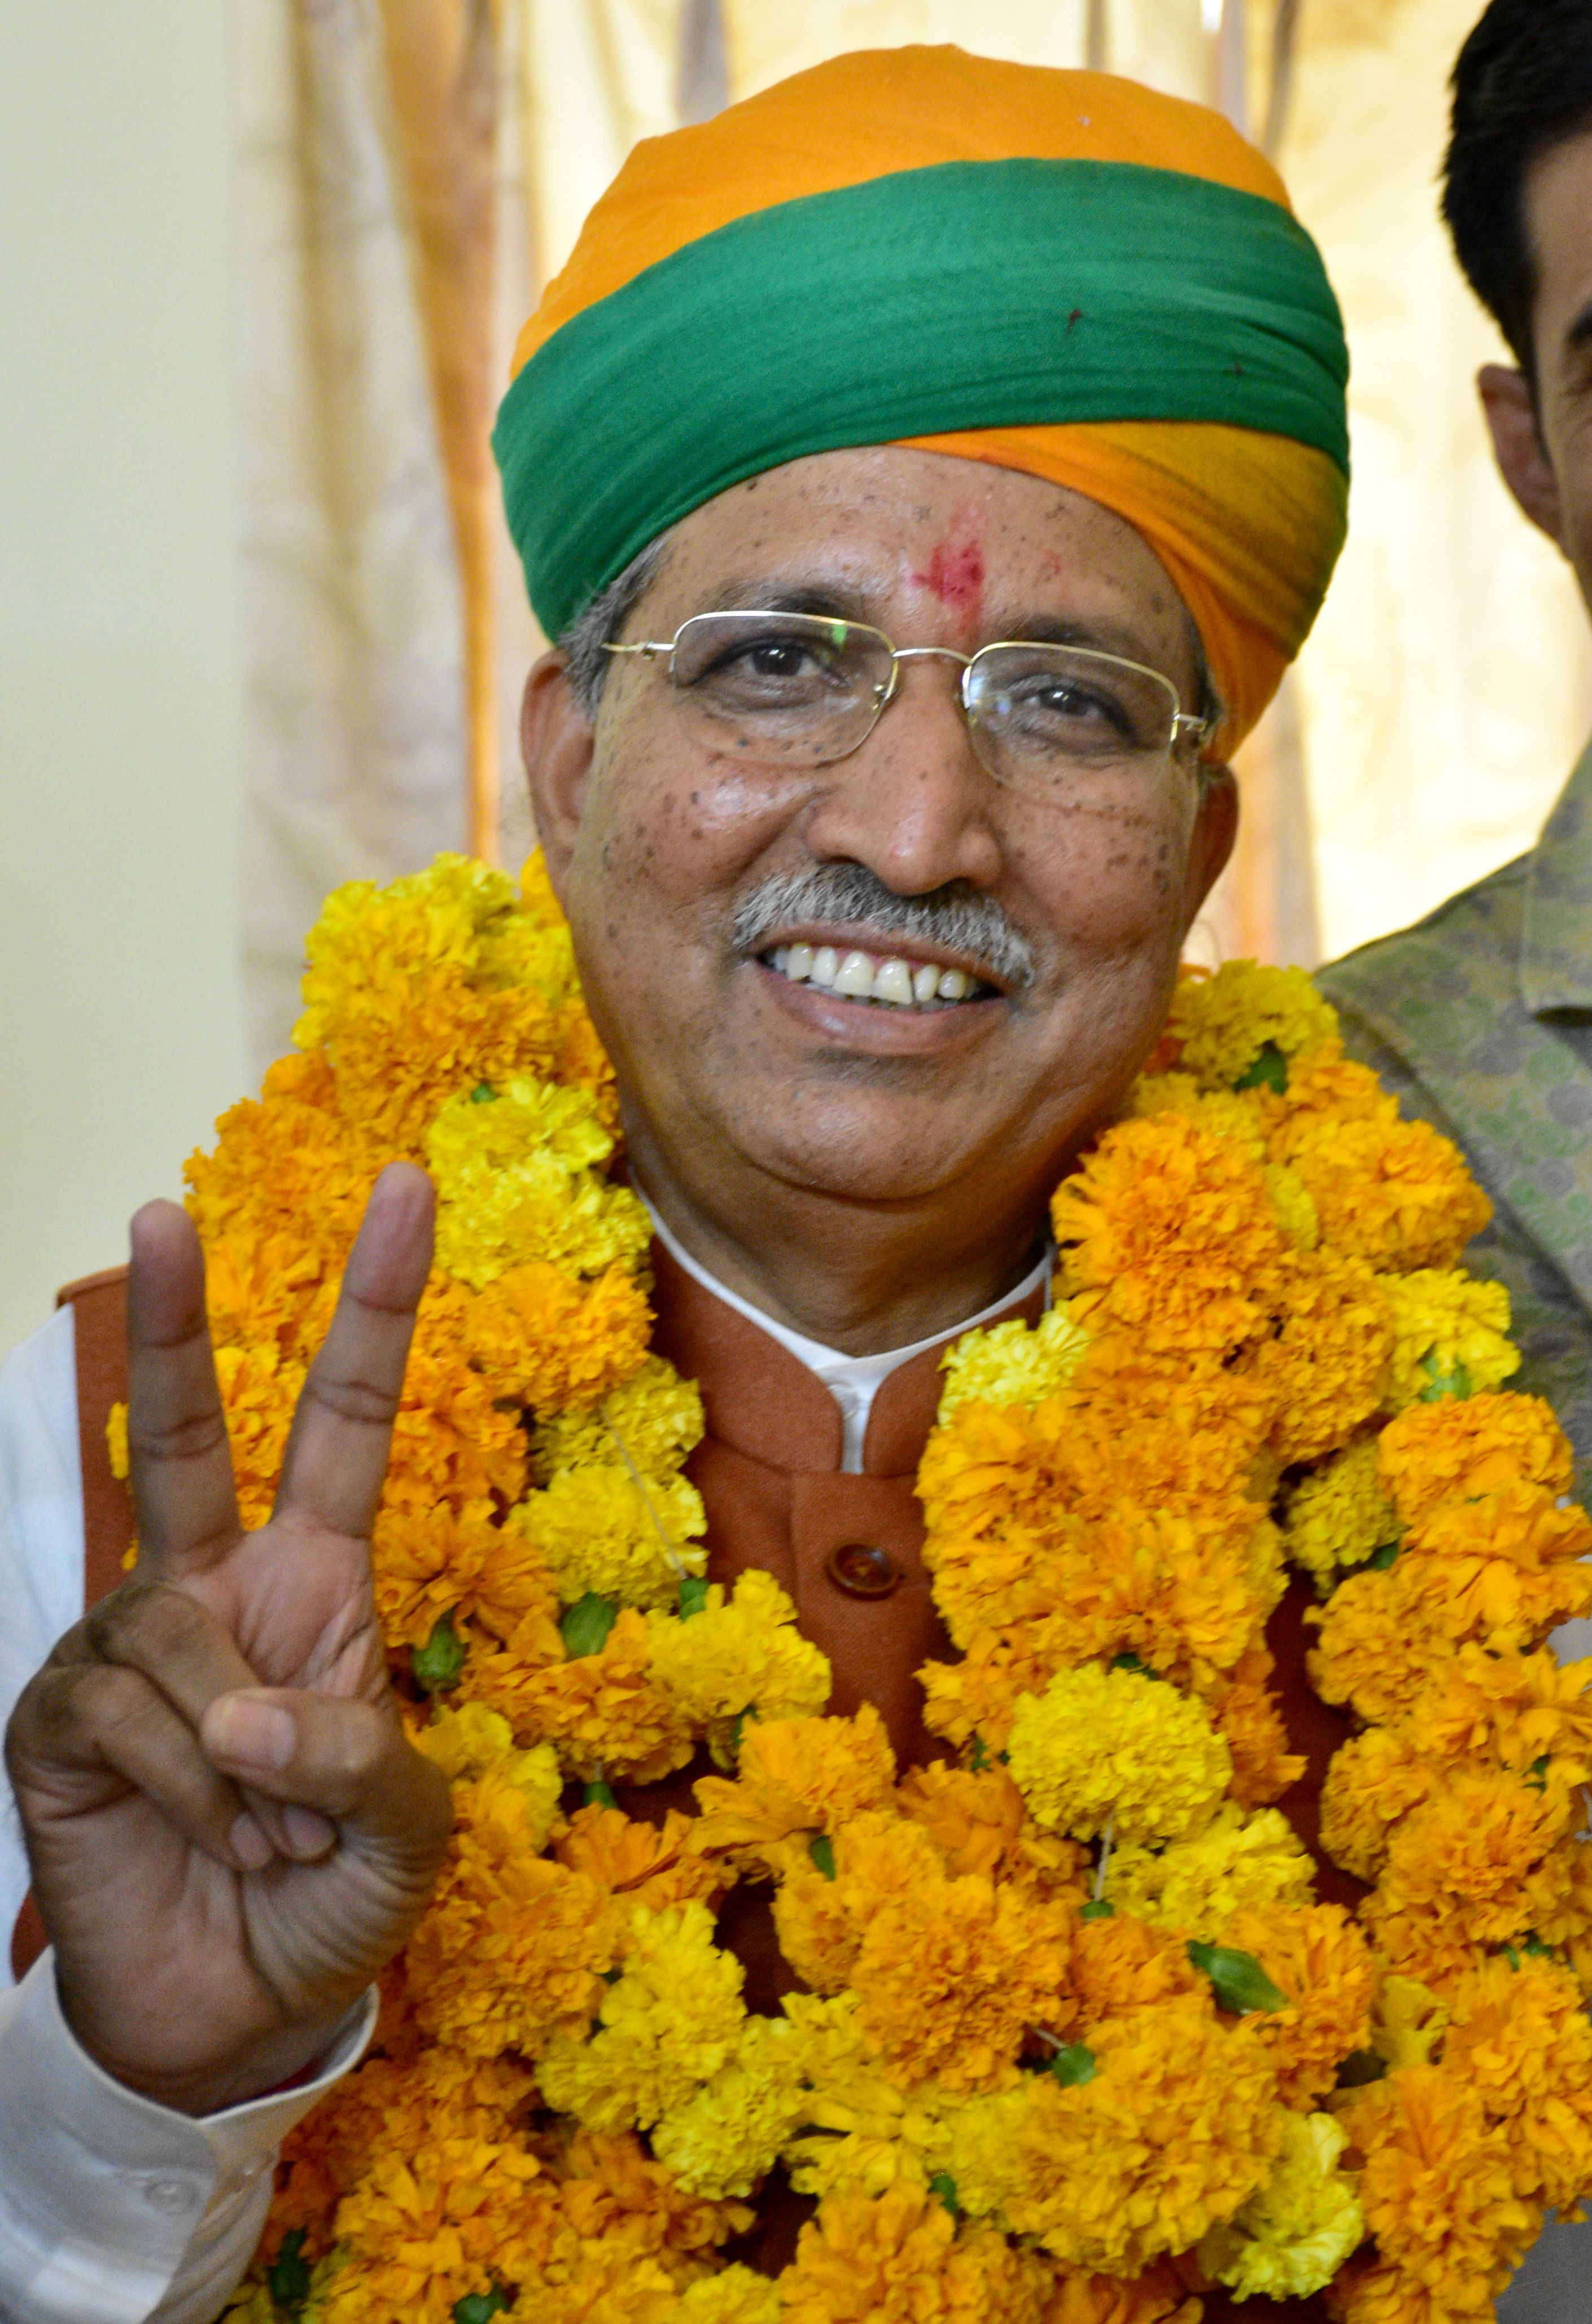 First interview - Special talks with Arjunram Meghwal after victory